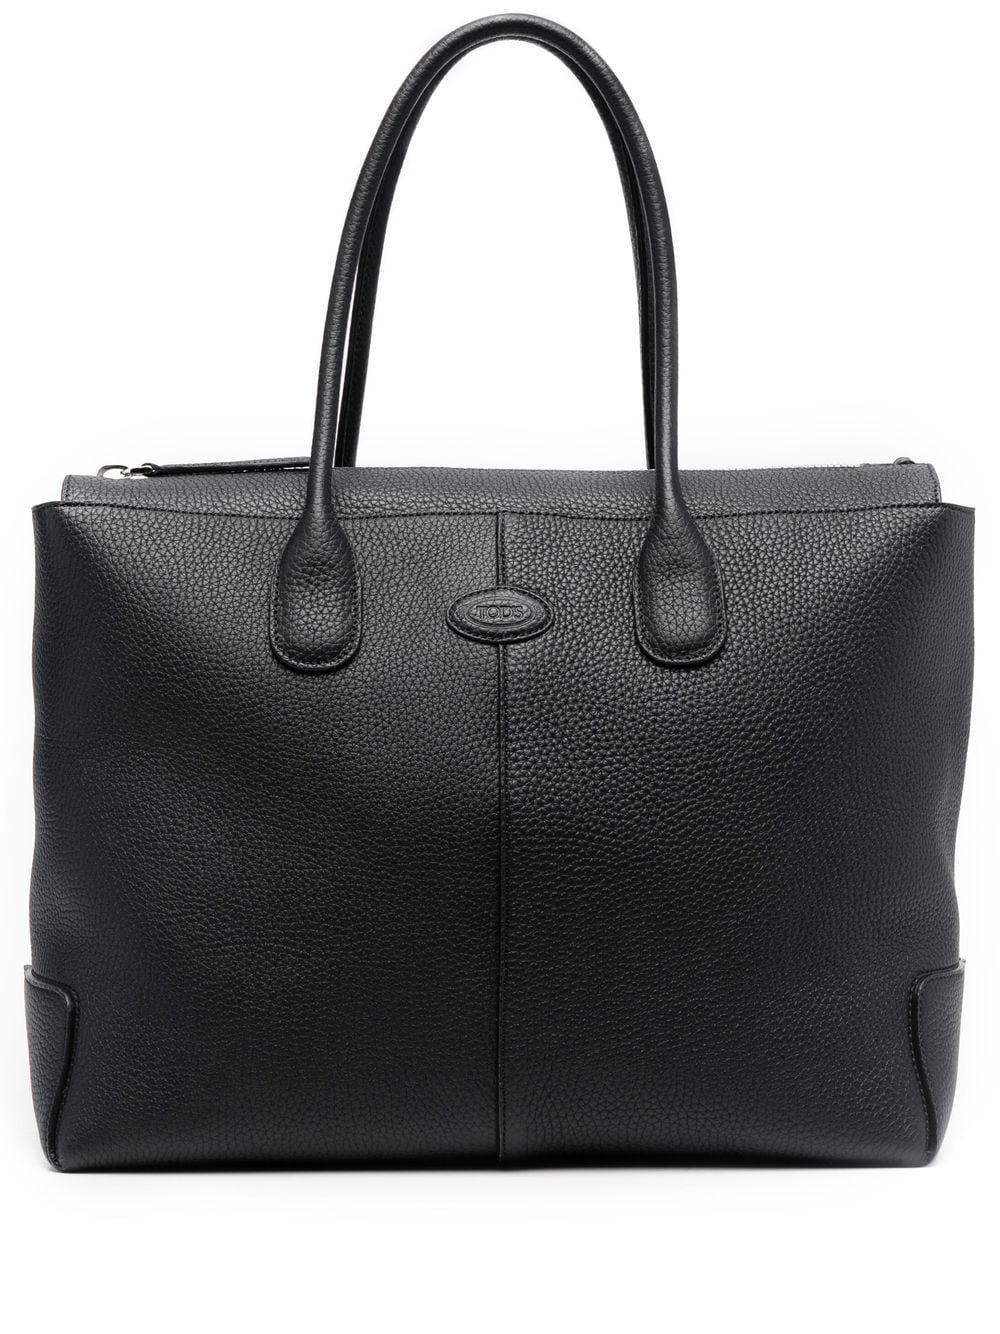 Image 1 of Tod's zipped shopper tote